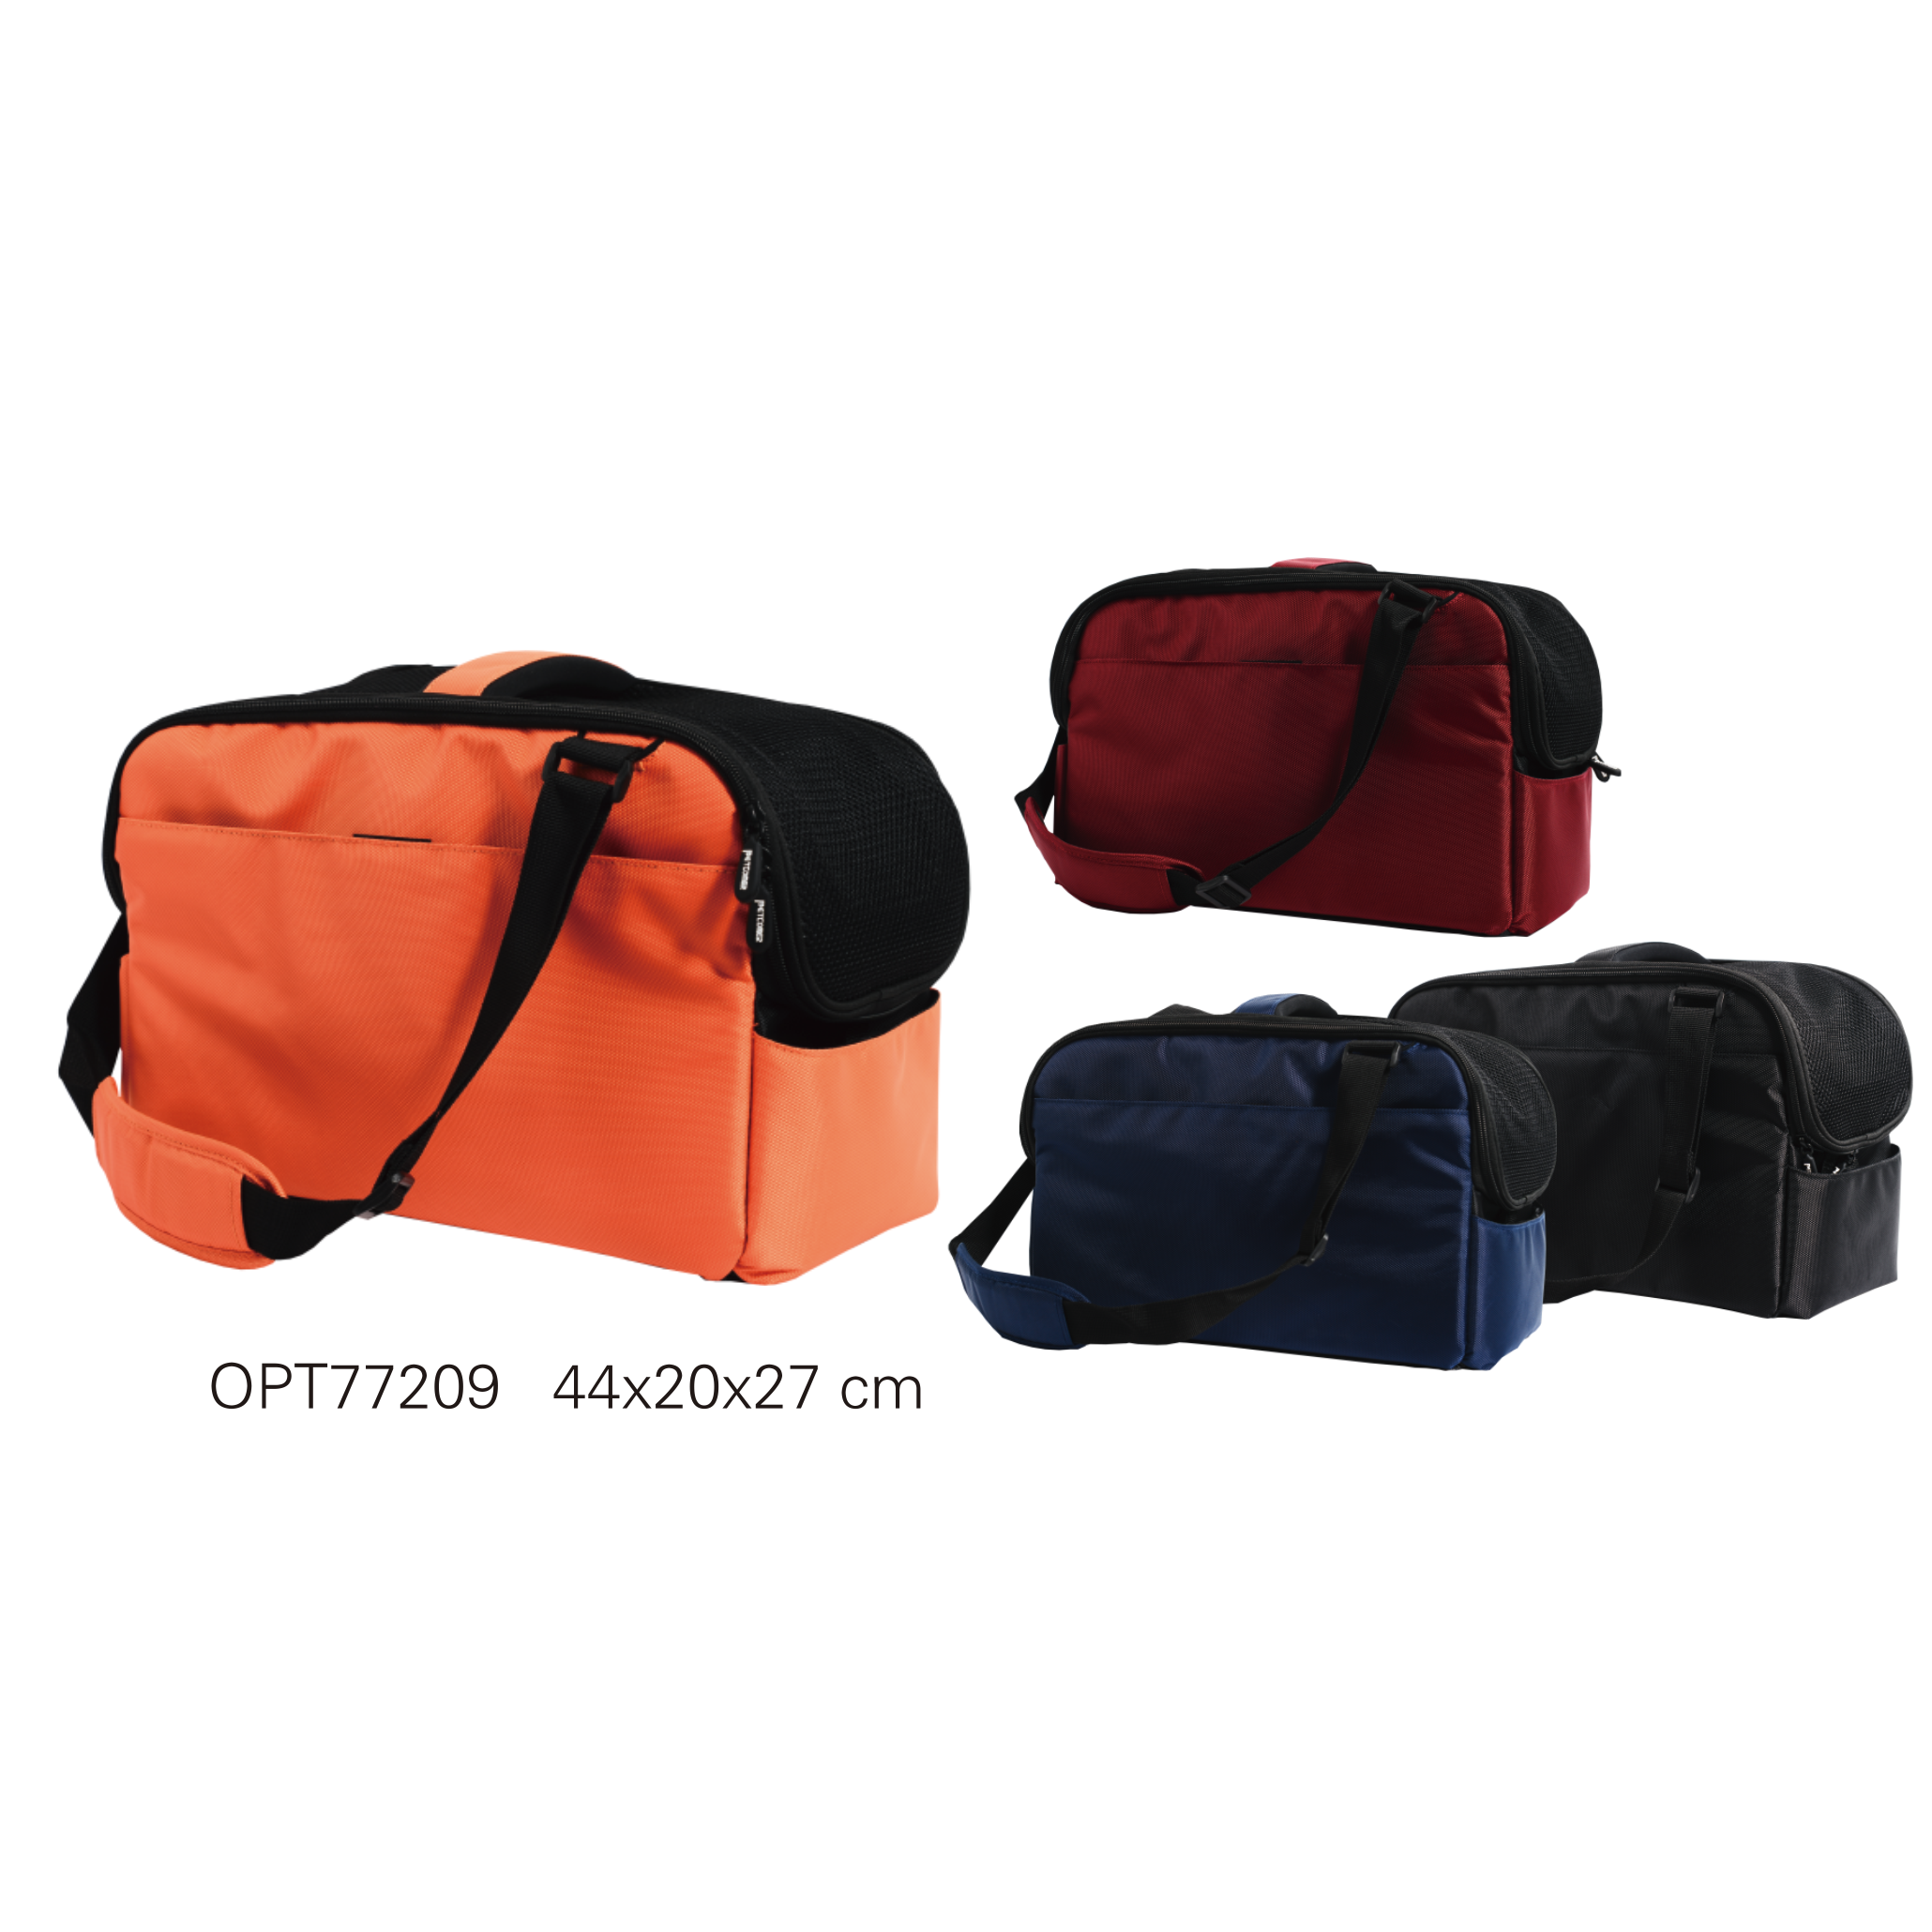 OPT77209 Pet bags & carriers